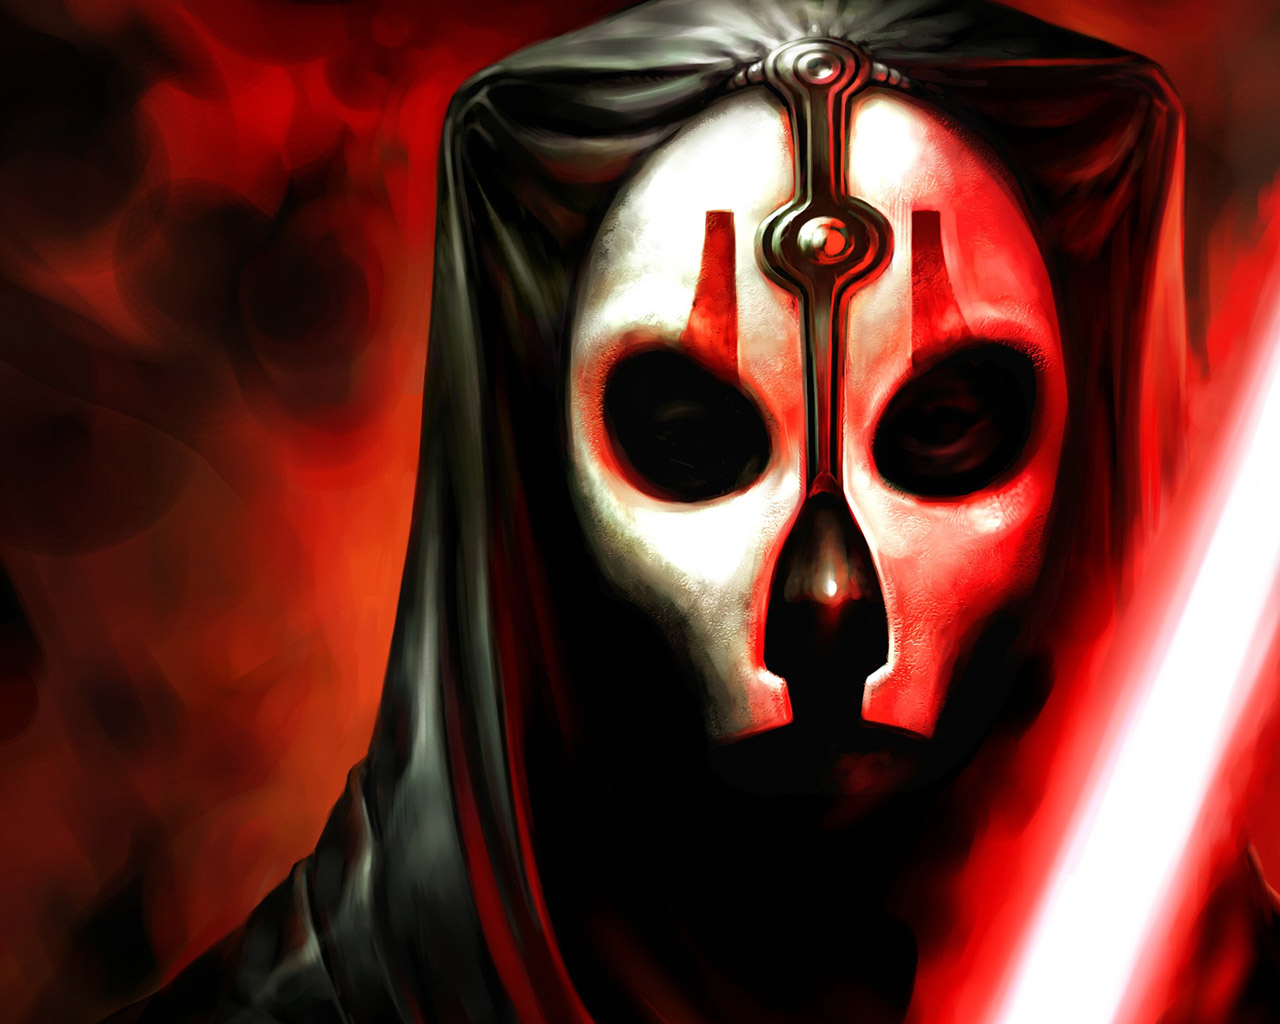 STAR WARS KNIGHTS OF THE OLD REPUBLIC II - THE SITH LORDS